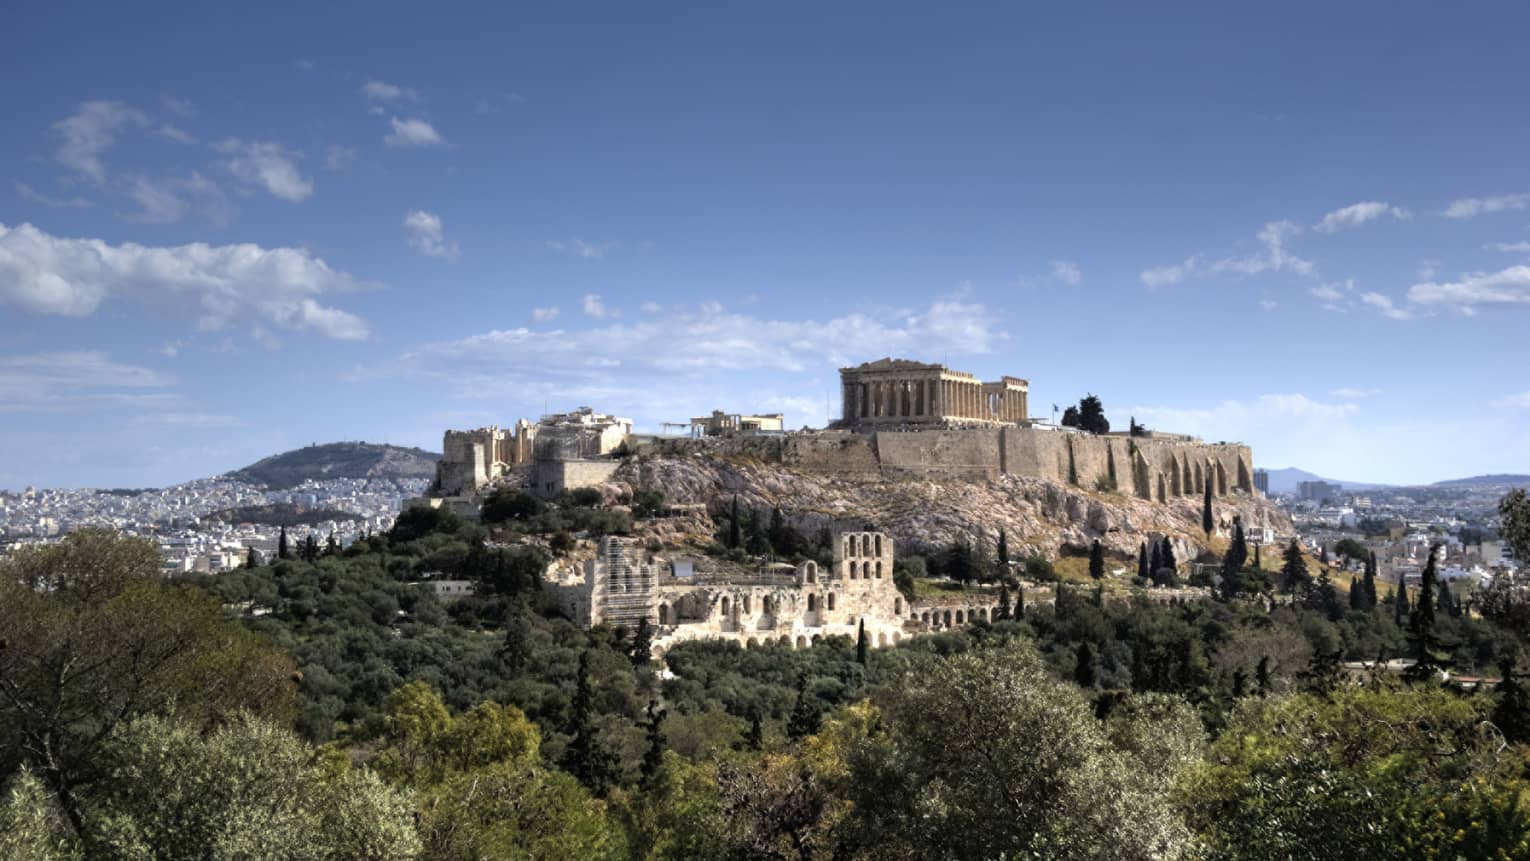 Ancient ruins of Acropolis on mountain surrounded by greenery 